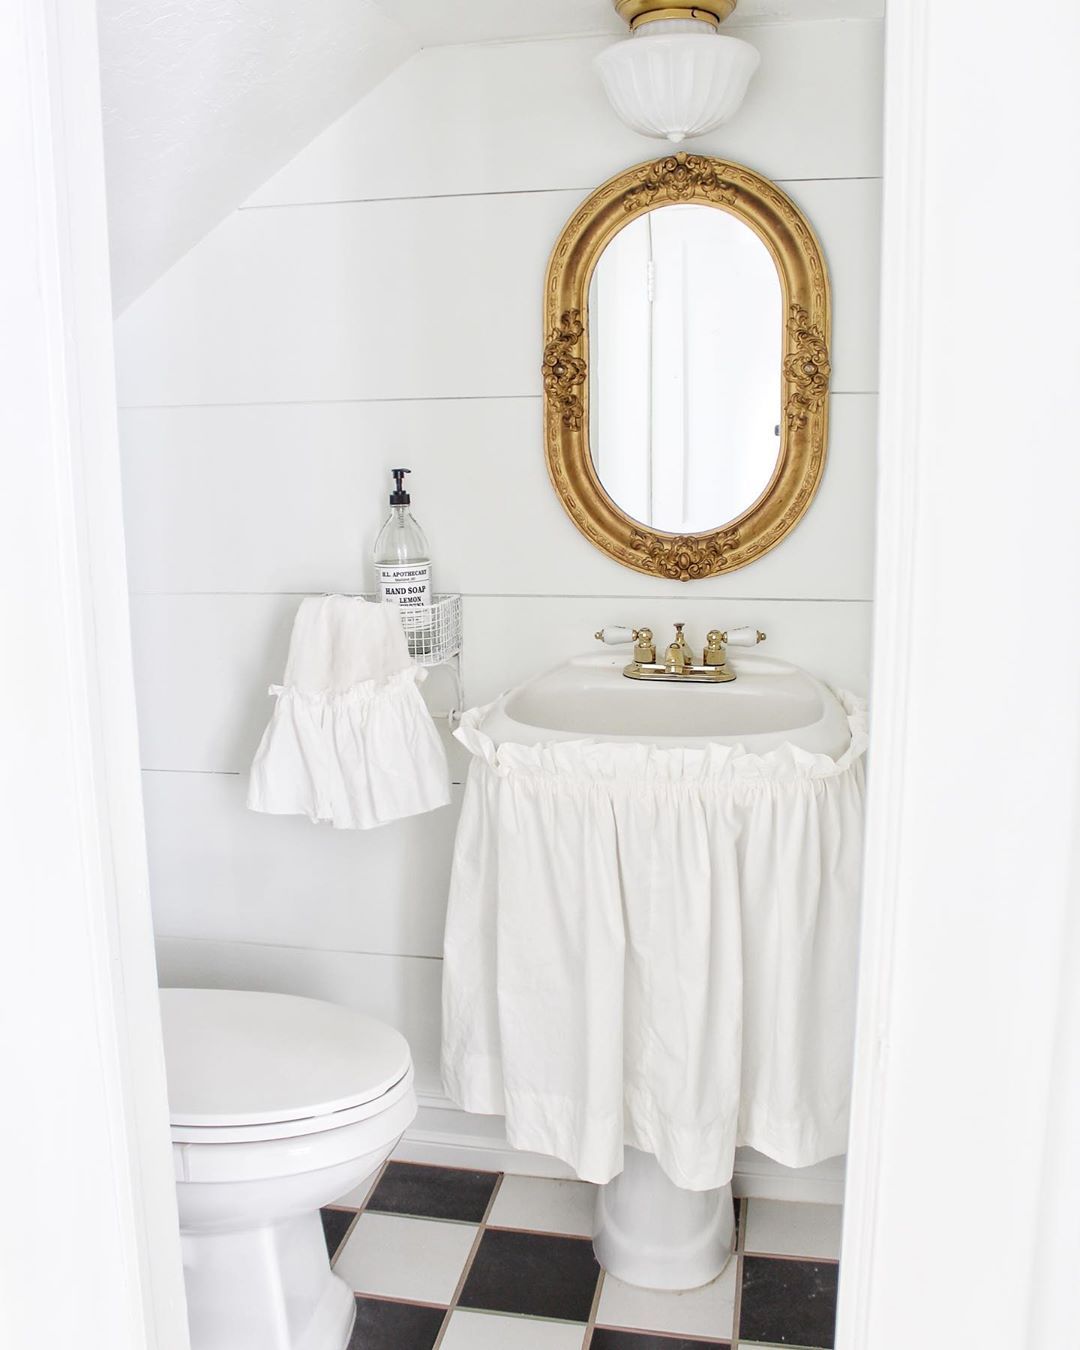 French Country Bathroom with Ruffle Skirt Around Sink via @simplyfrenchmarket